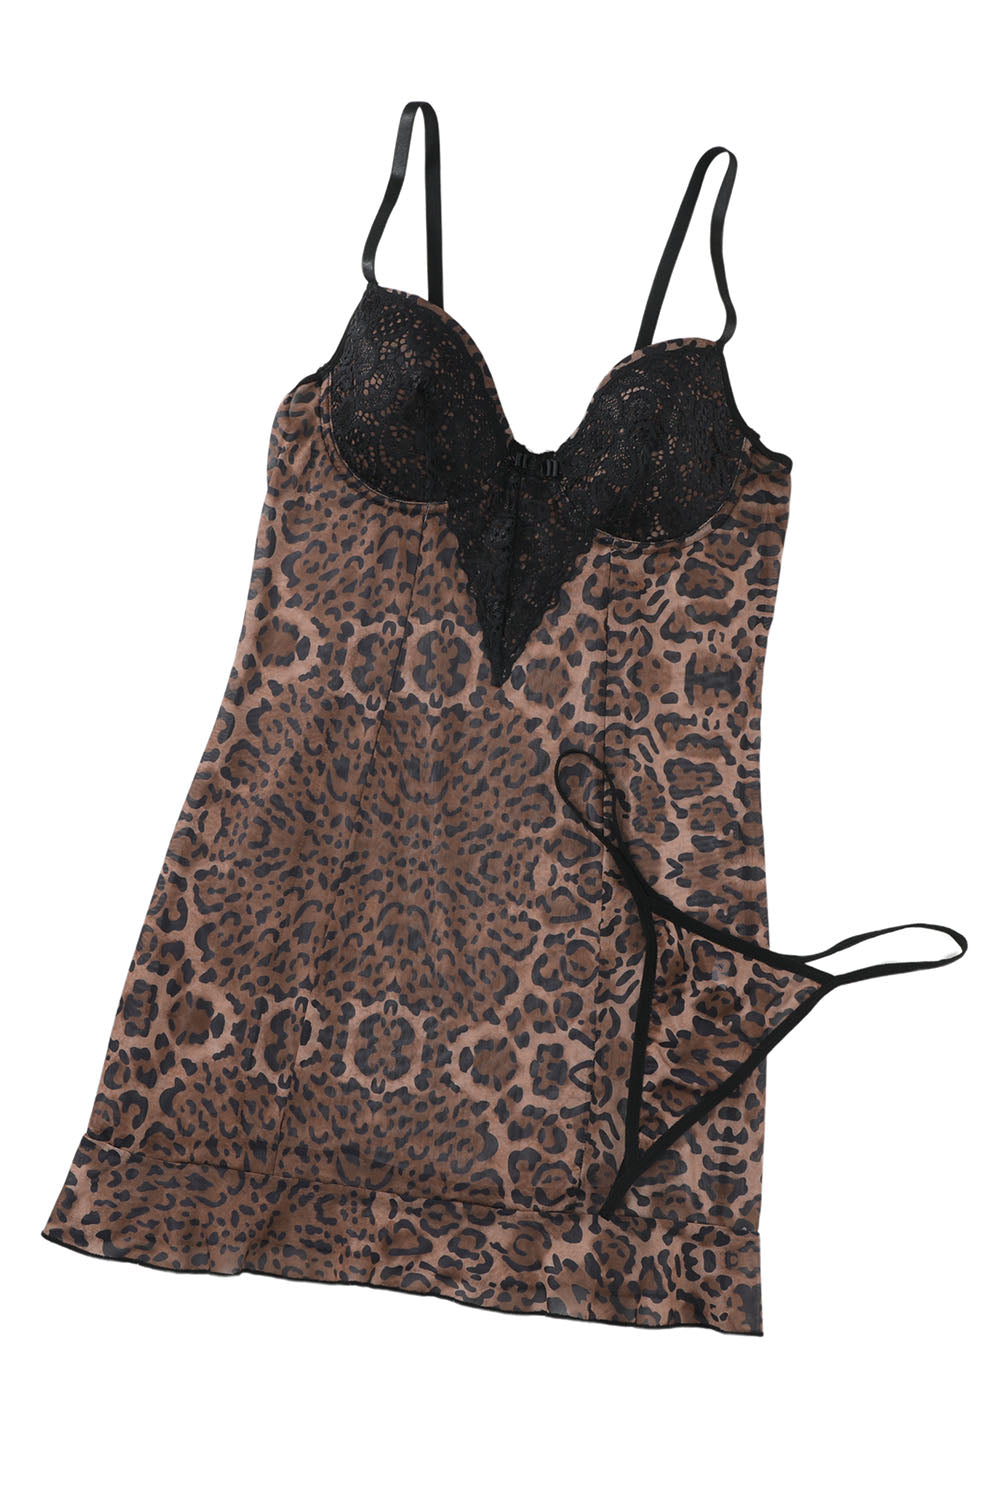 Leopard Lace Splicing Babydoll Set with Thong